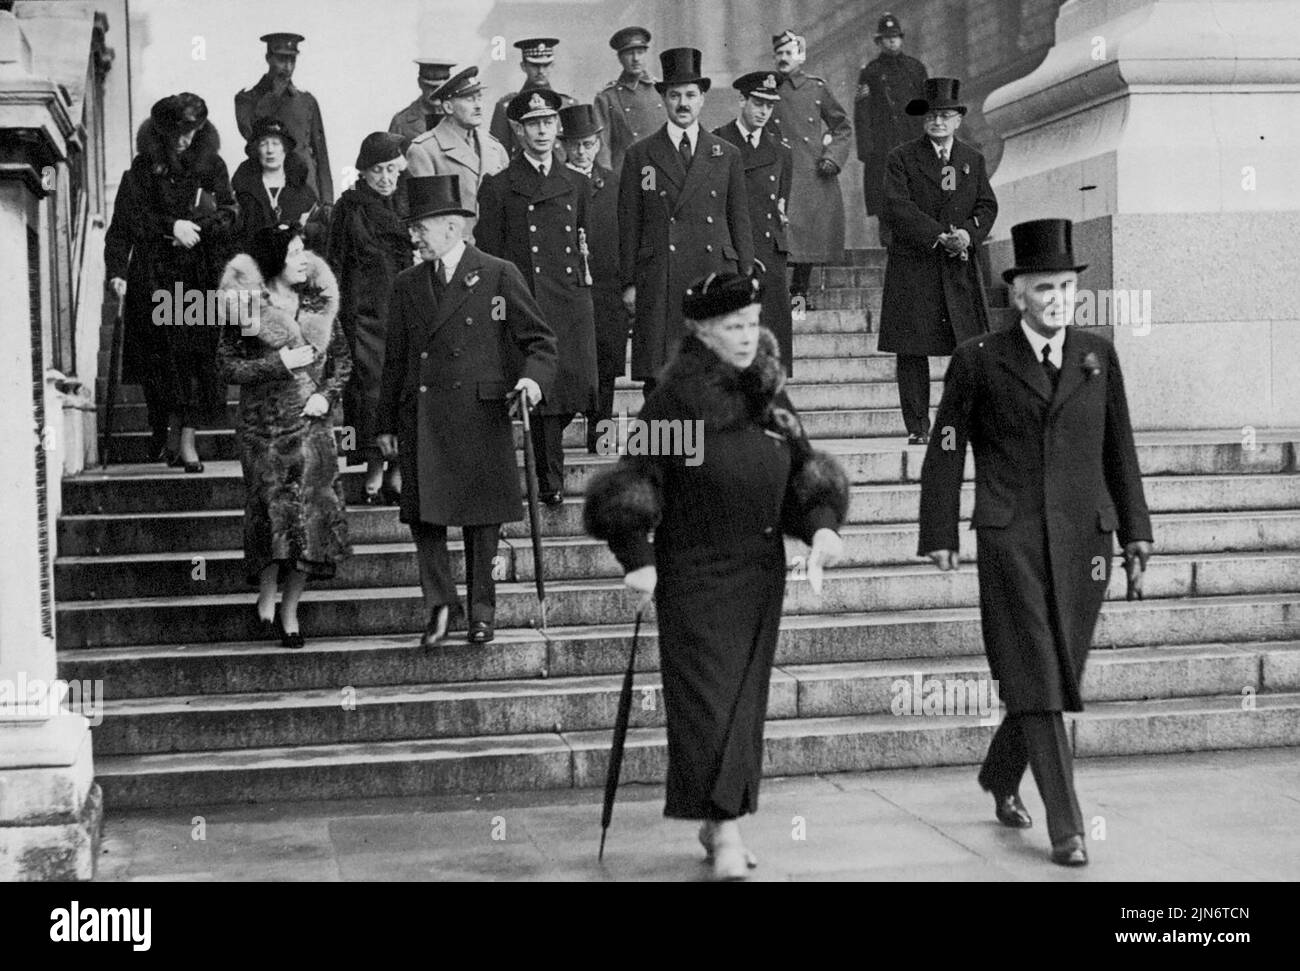 Armistice Day In London -- H.M. the Queen leaving the Home Office with Sir John Simon after watching the ceremony at the Cenotaph. Group at back includes the Duke and Duchess of York, the Duke of Kent, Prince Arthur of Connaught, Princess Helena Victoria and Princess Marie Louise. November 11, 1935. (Photo by The International Graphic Press Ltd.). Stock Photo